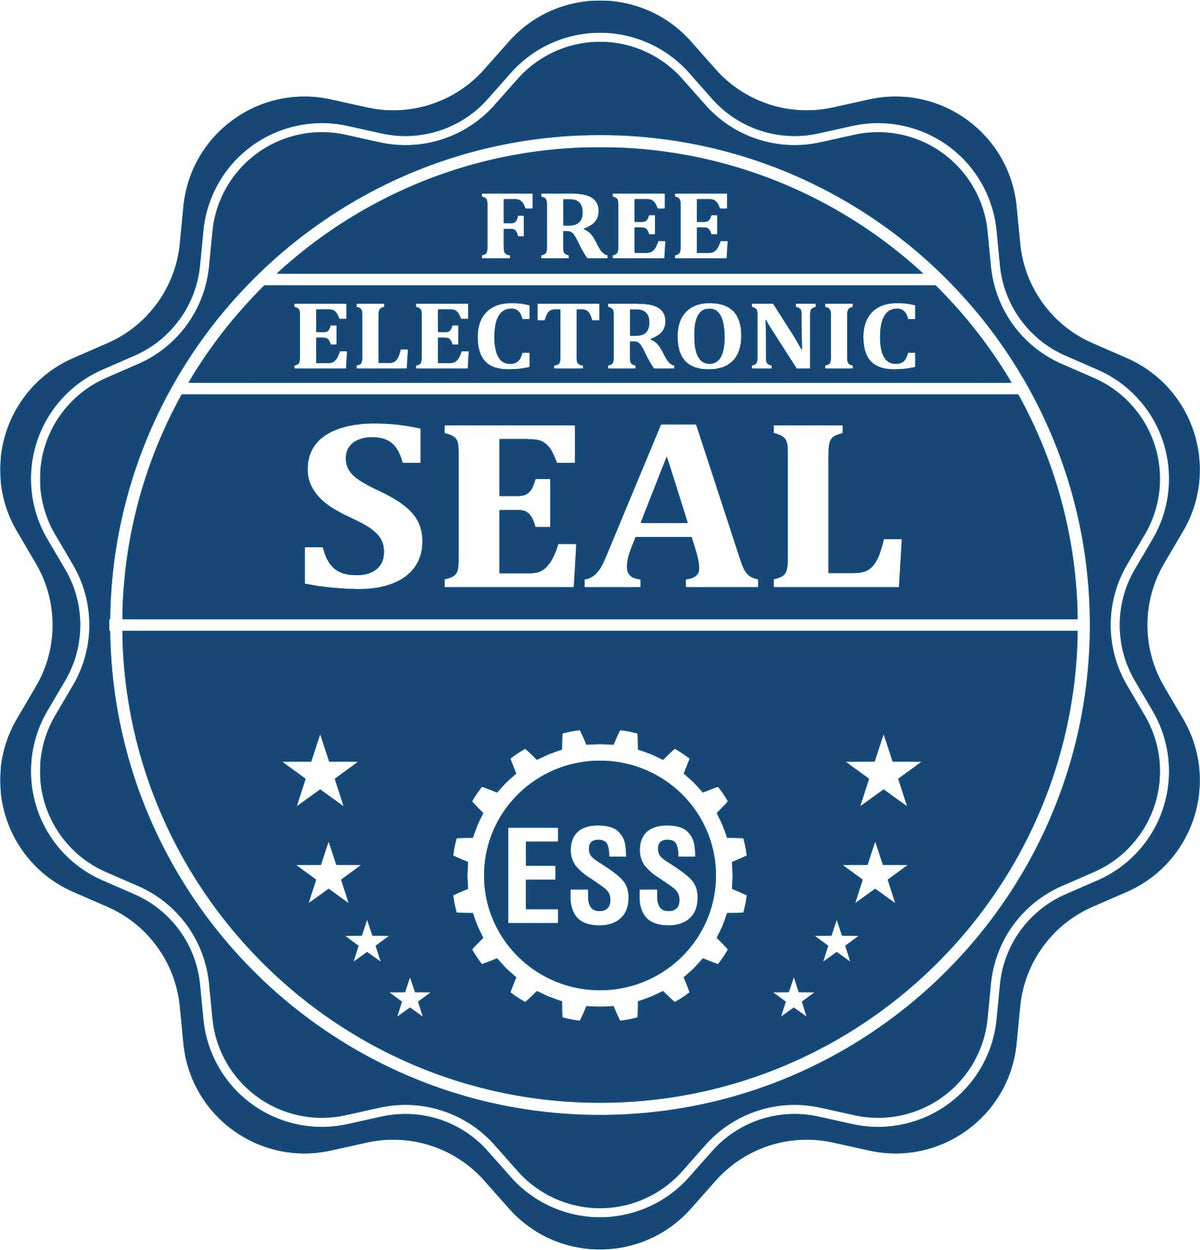 A badge showing a free electronic seal for the Gift Indiana Architect Seal with stars and the ESS gear on the emblem.